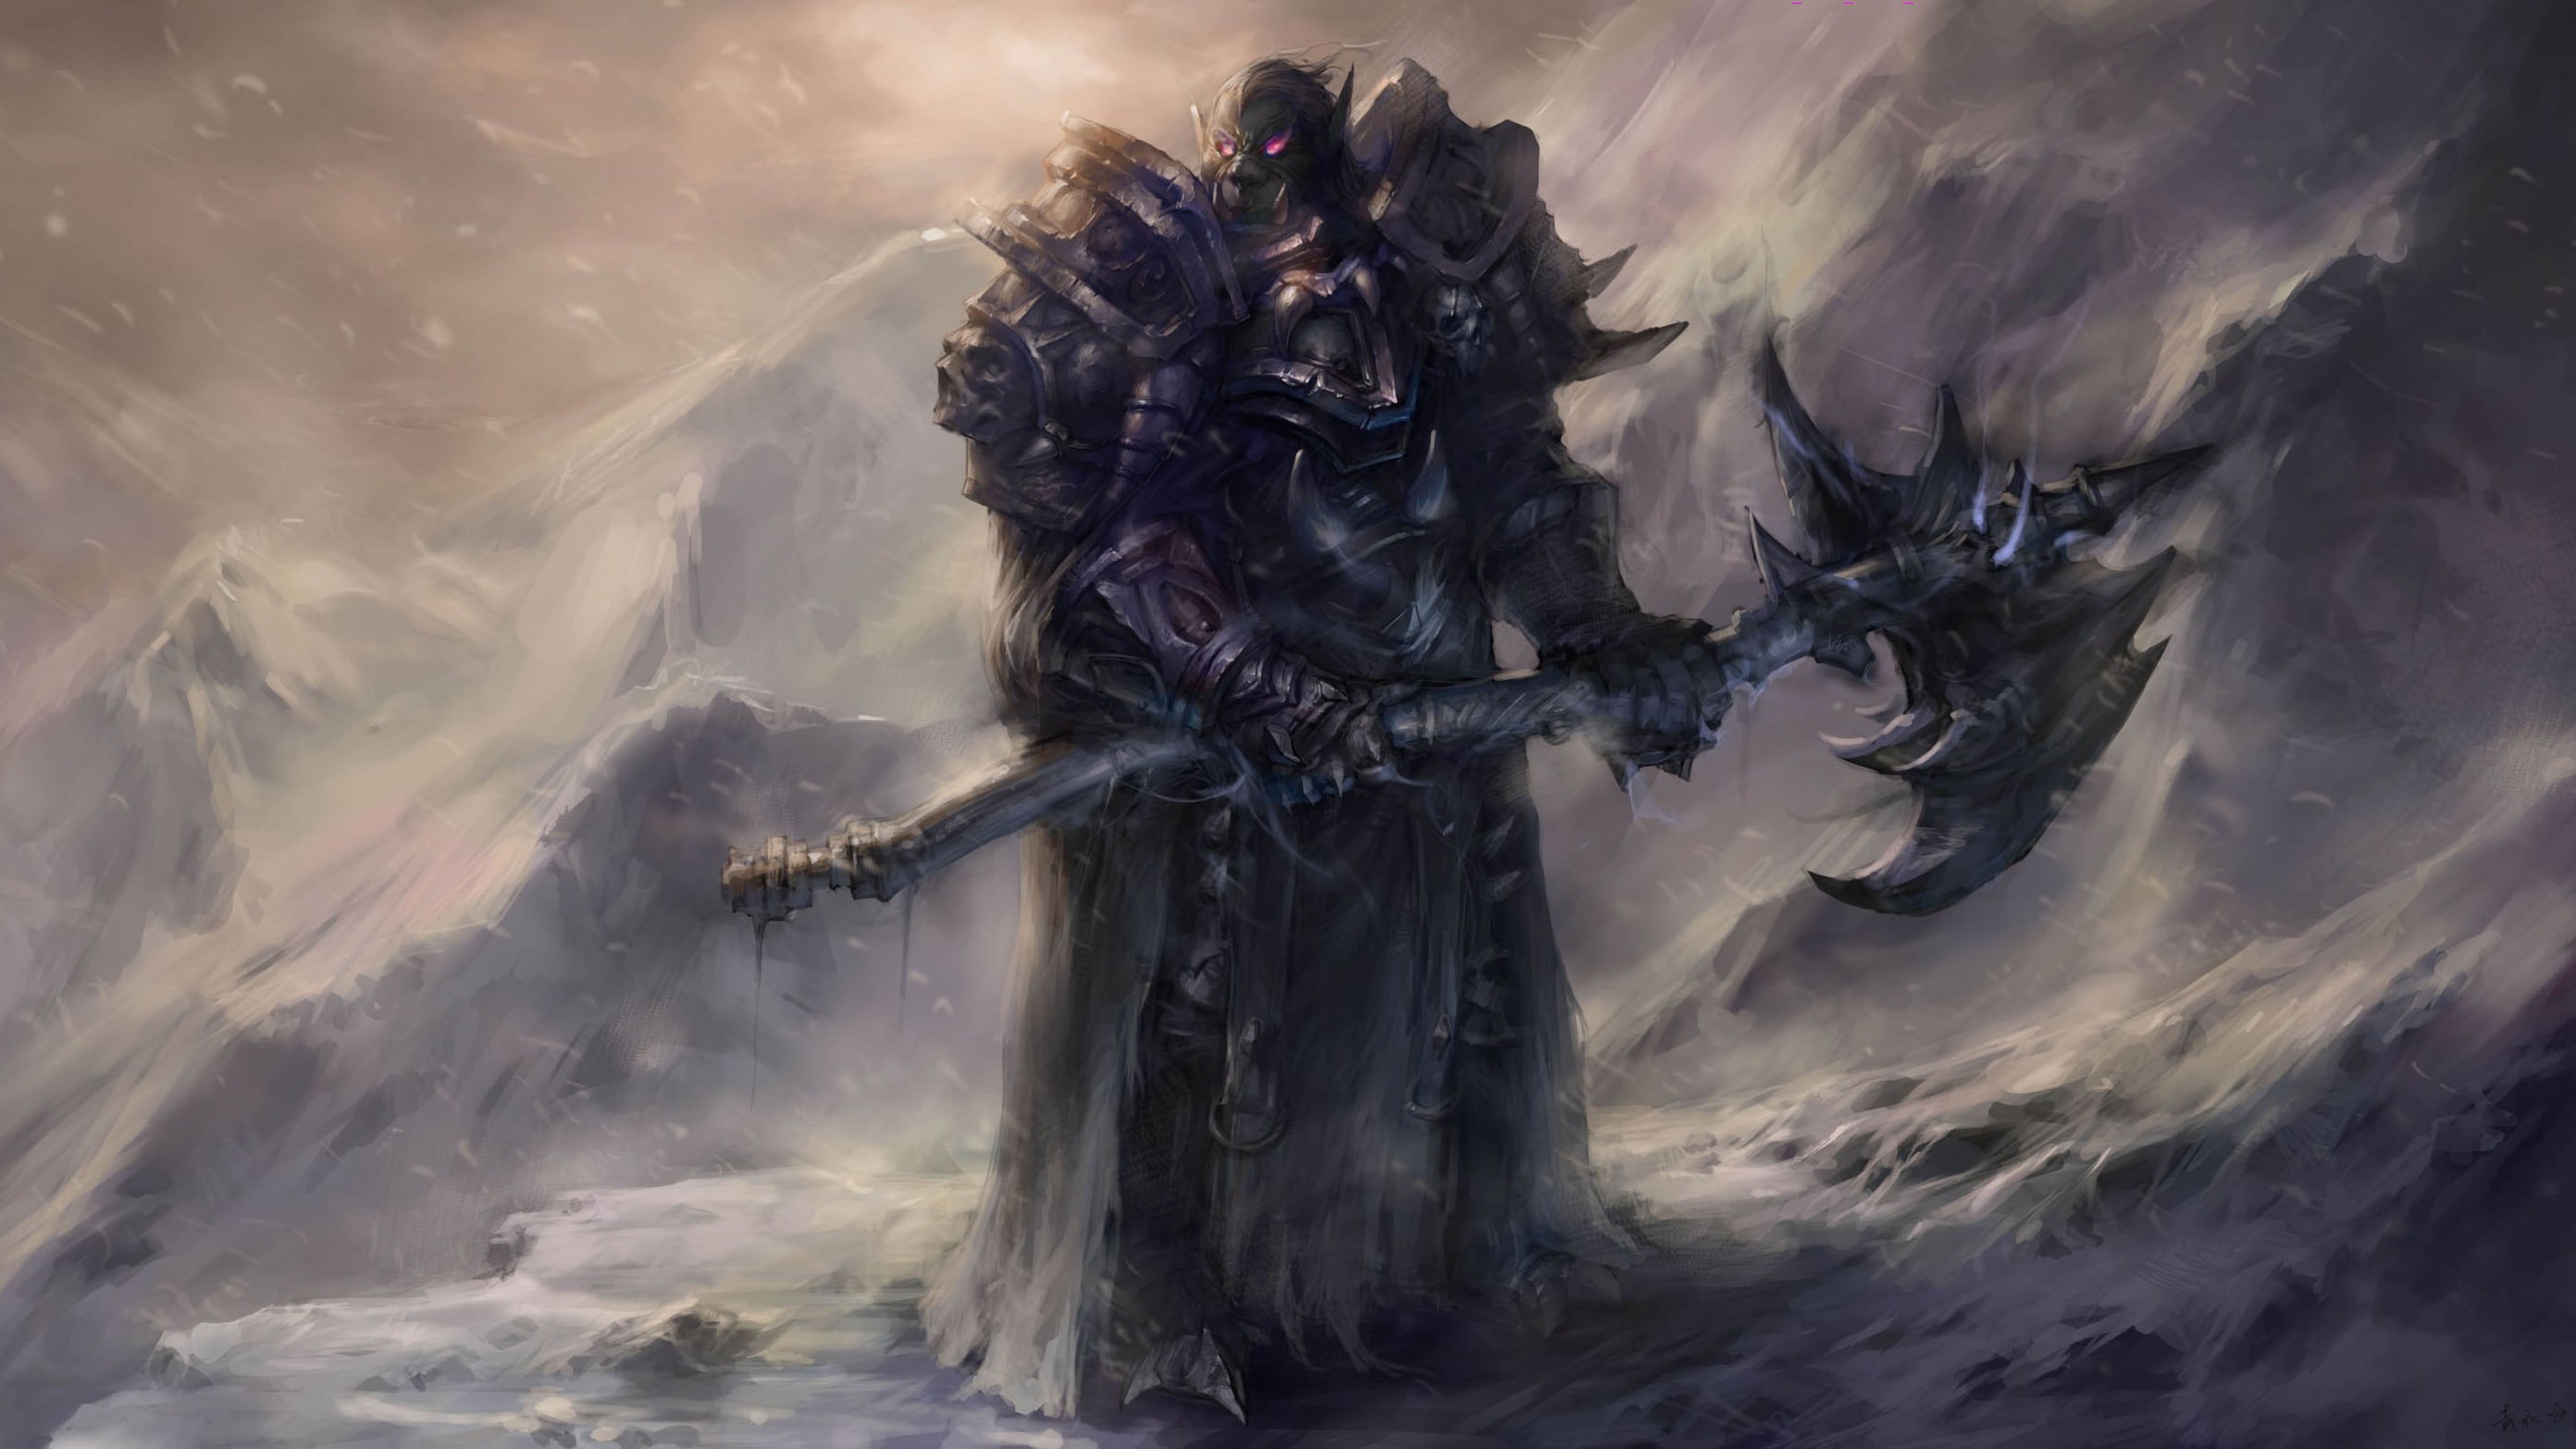 2784x1566 World of Warcraft Orc Knight Wallpaper